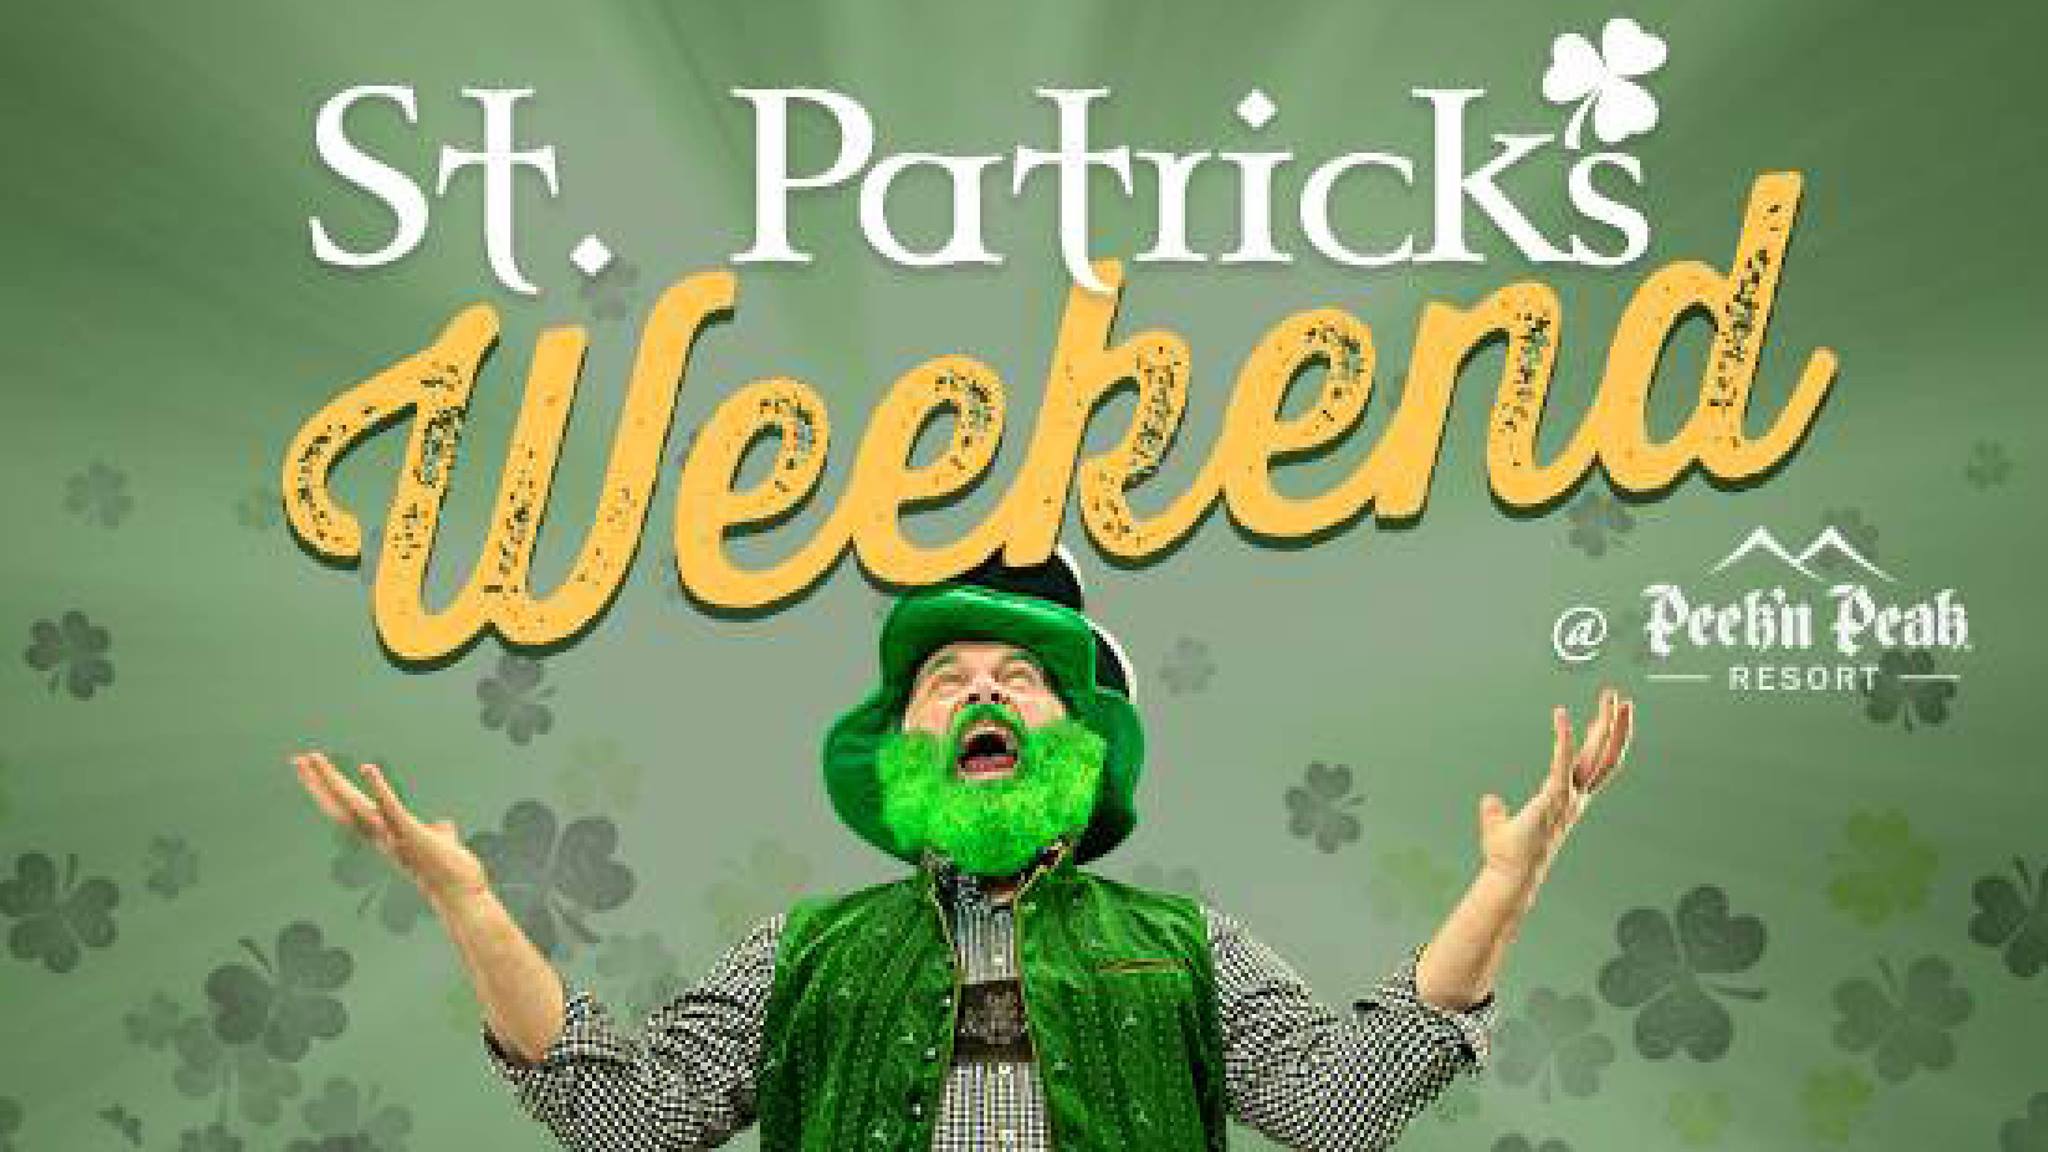 St. Patrick's Day Weekend at the Peek